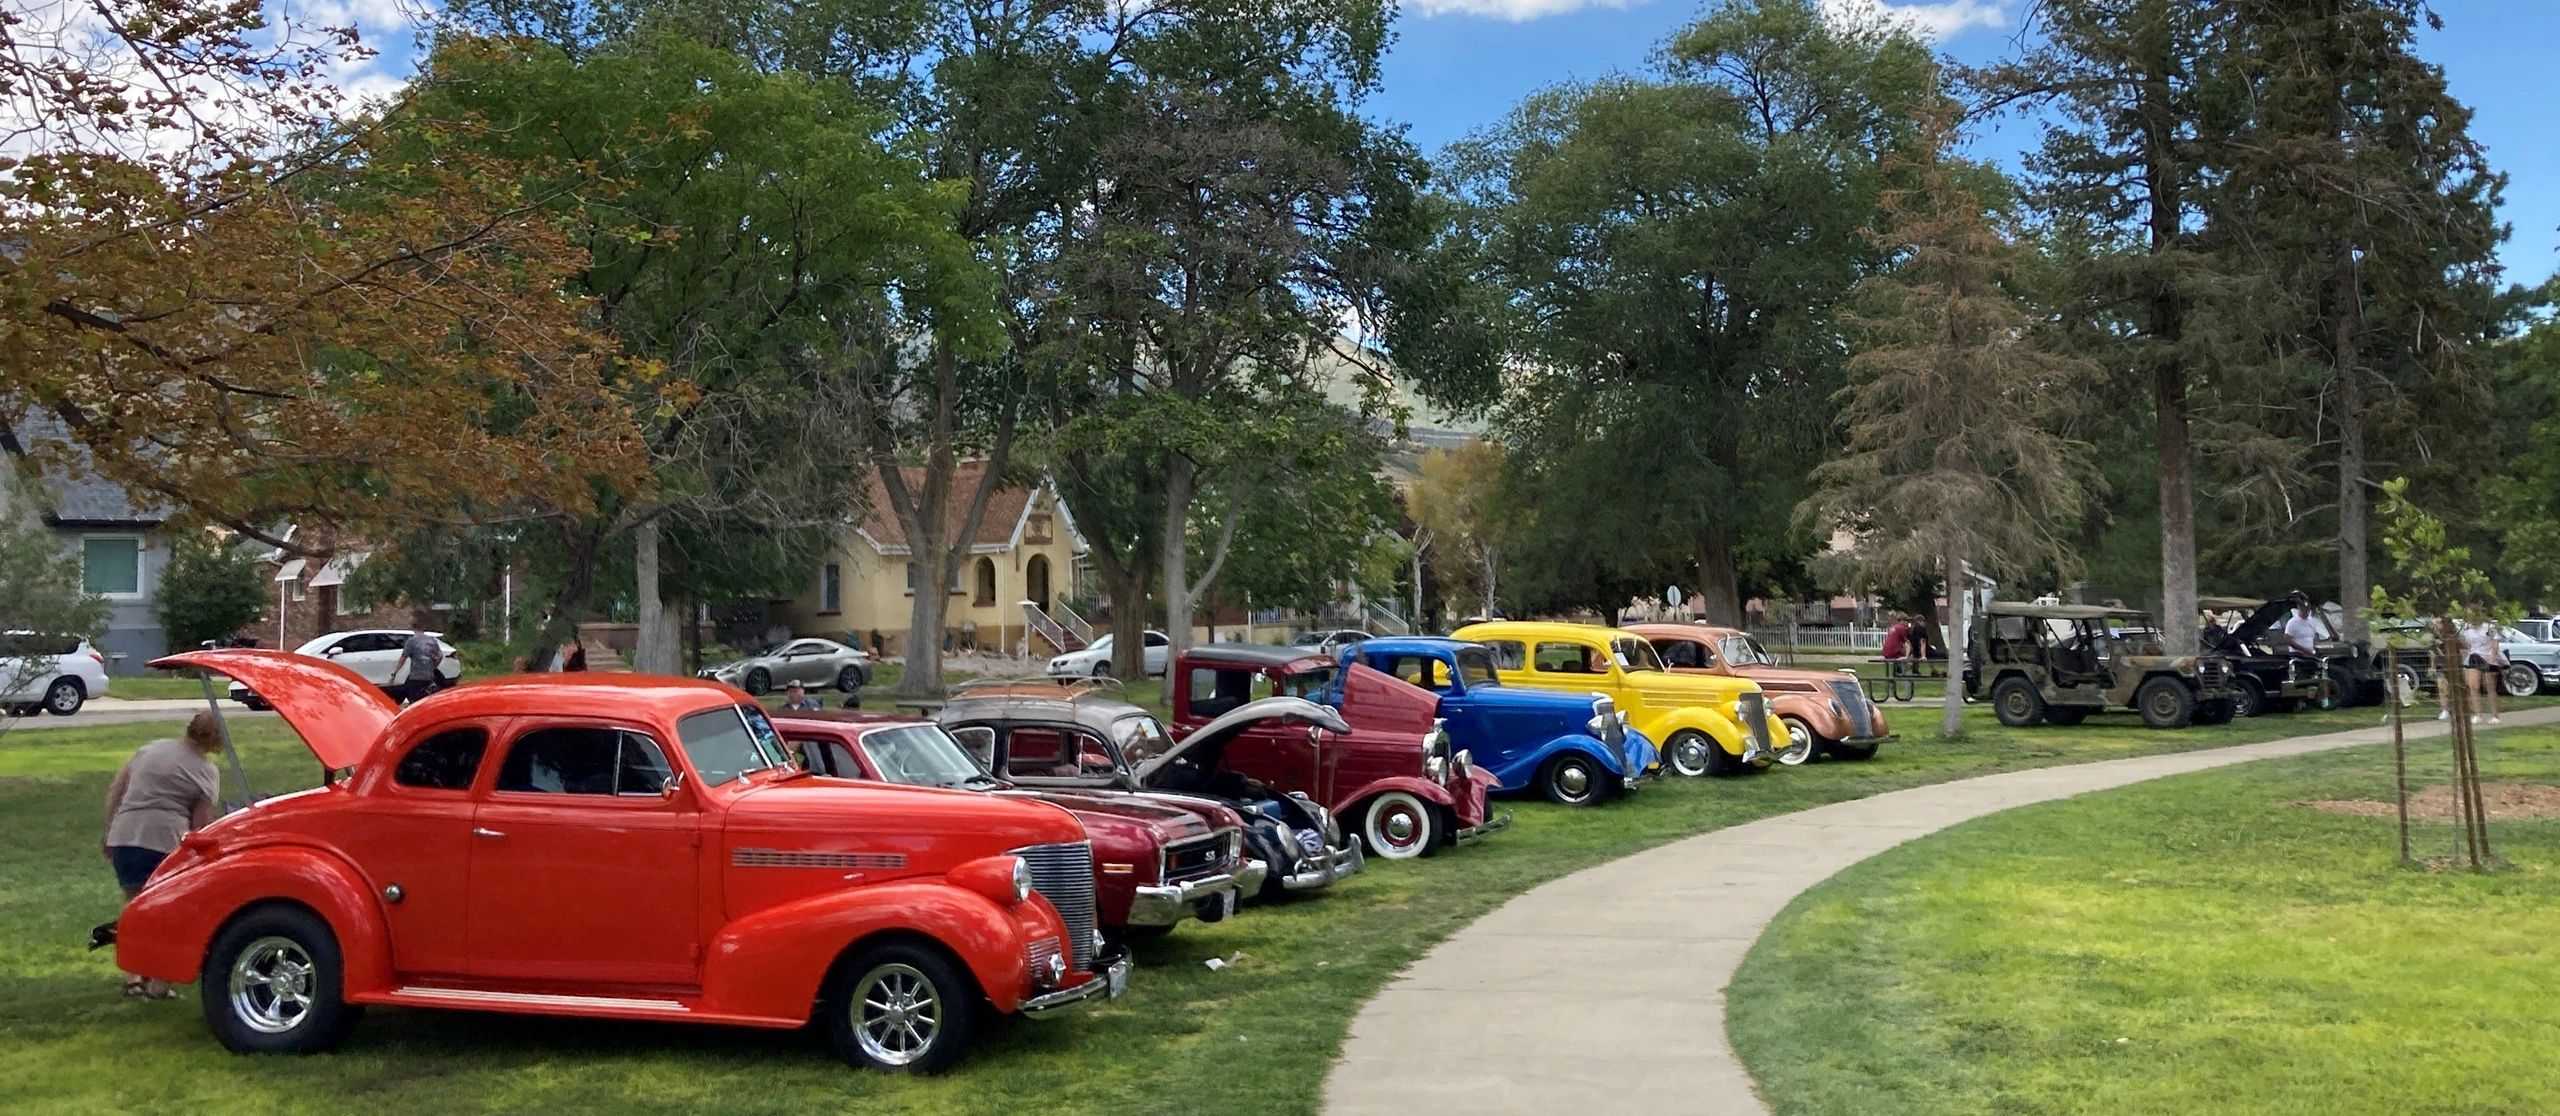 A row of brightly painted collectible cars at the Copperton Town Days car show.